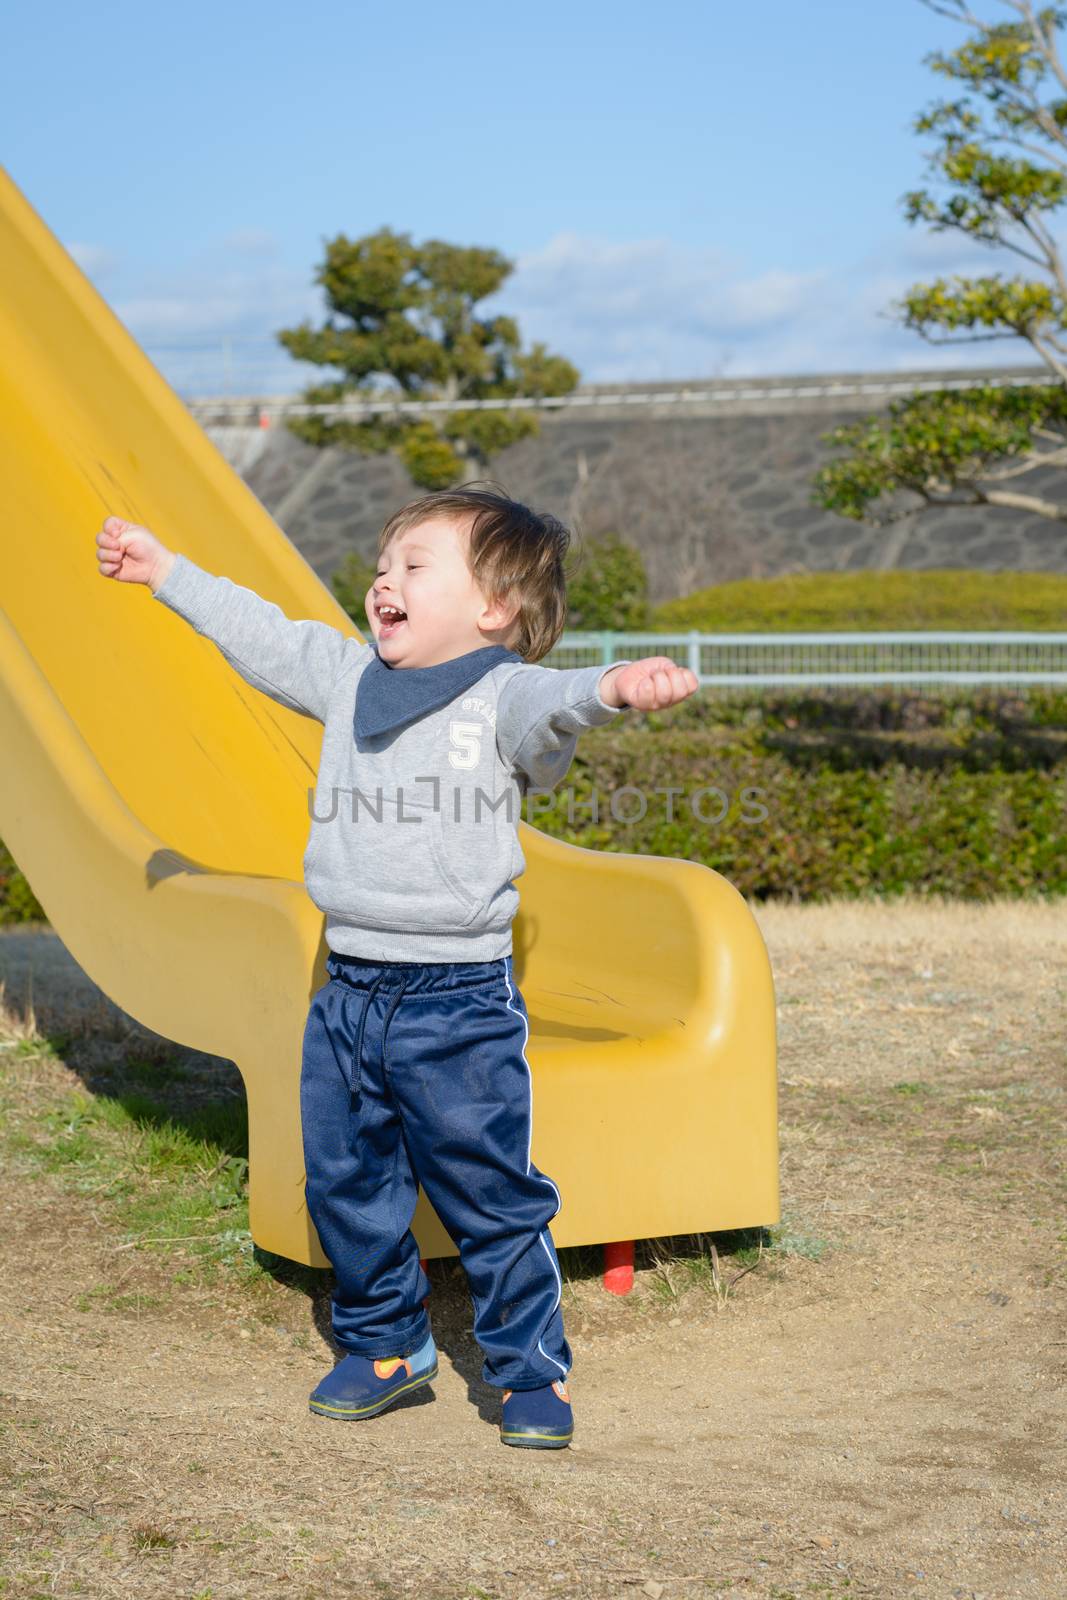 A 2 year old boy celebrating after going down a slide.